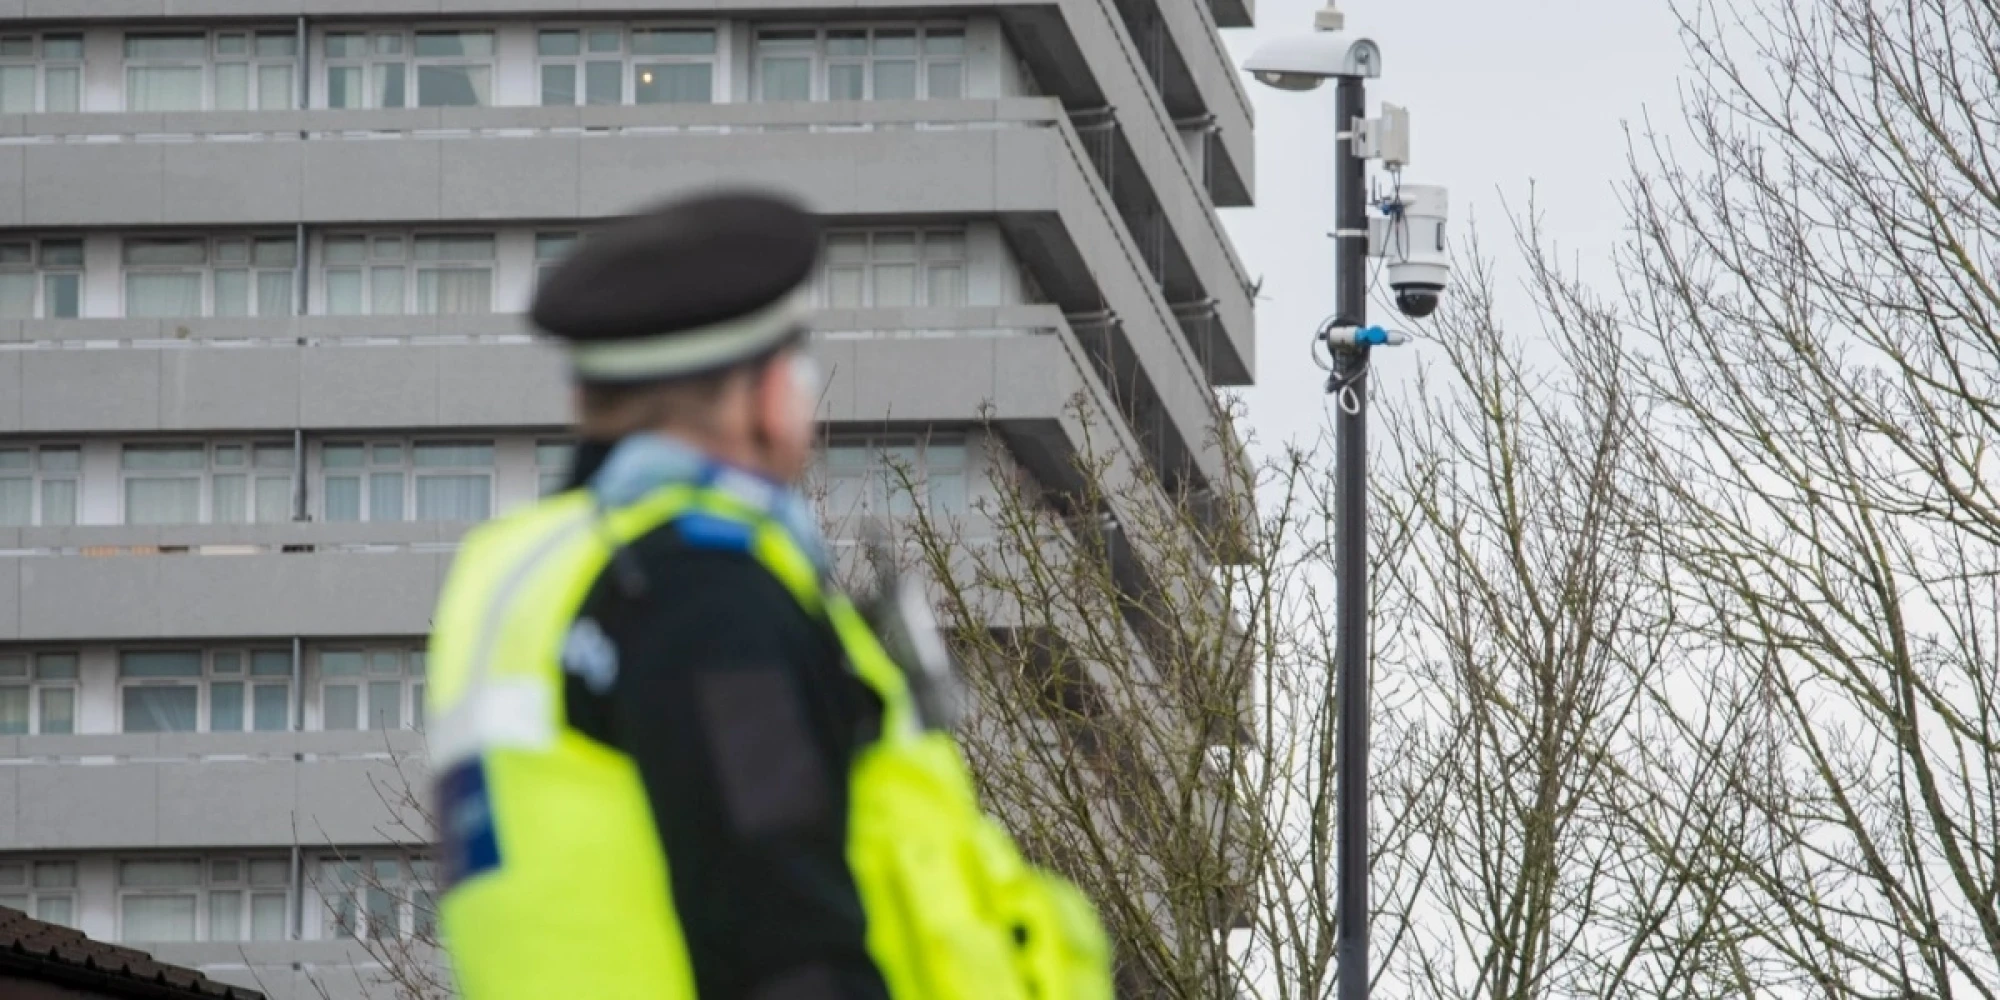 Police Officer Looking at a WCCTV Redeployable CCTV Camera Installed on Lamppost